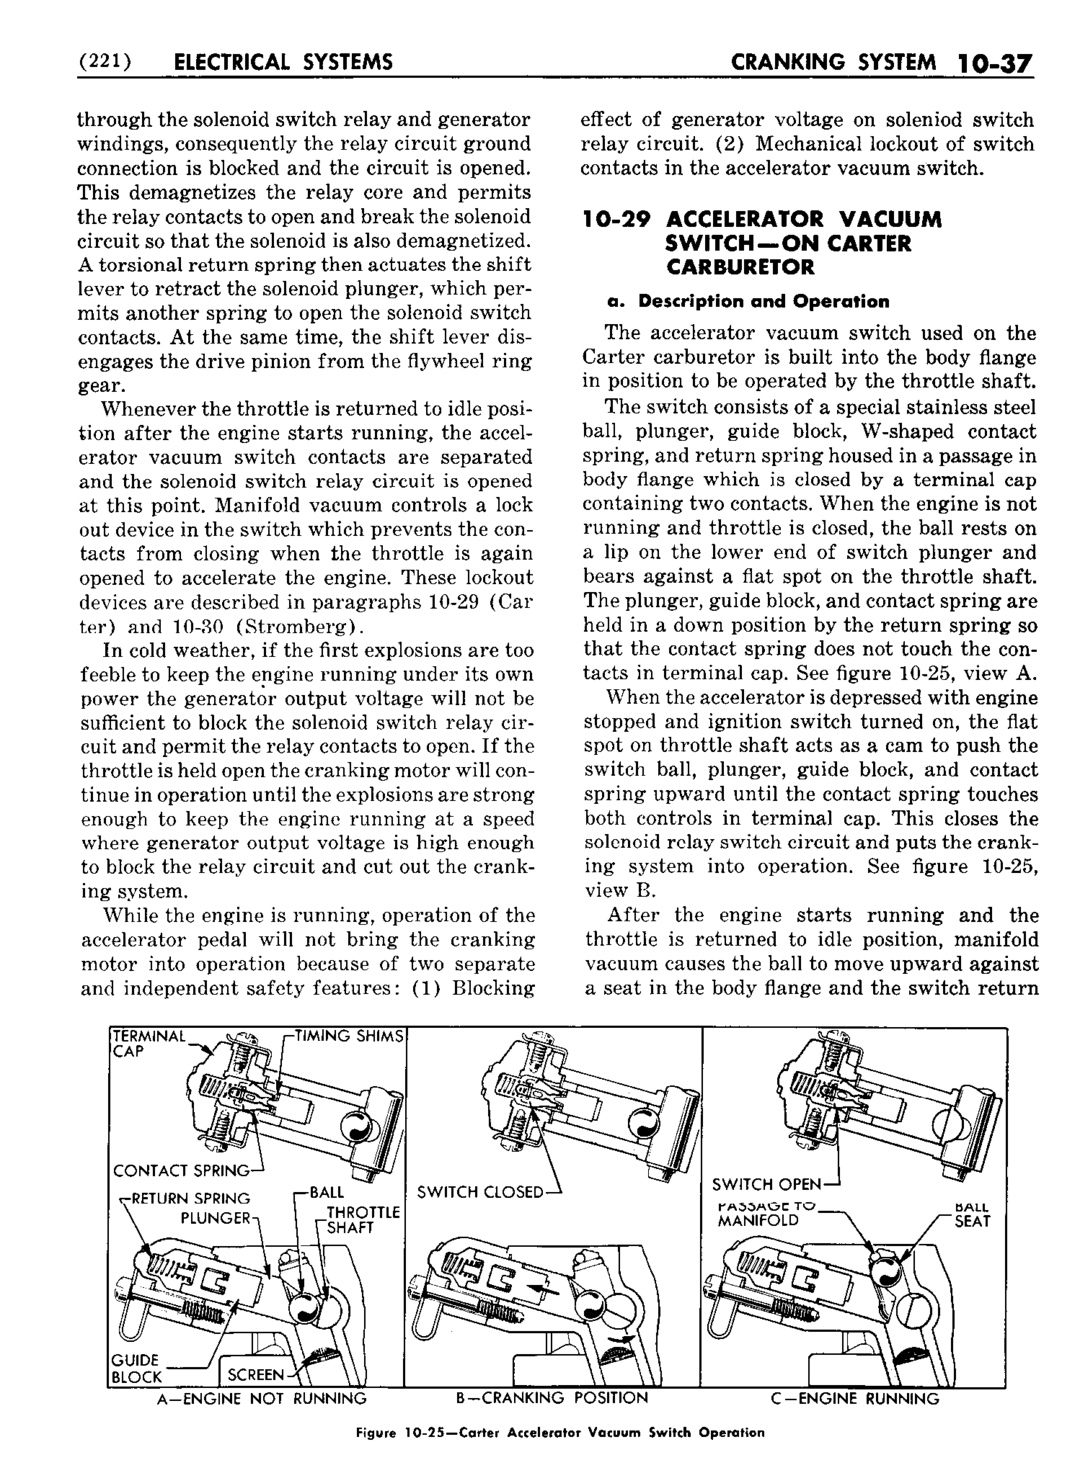 n_11 1953 Buick Shop Manual - Electrical Systems-037-037.jpg